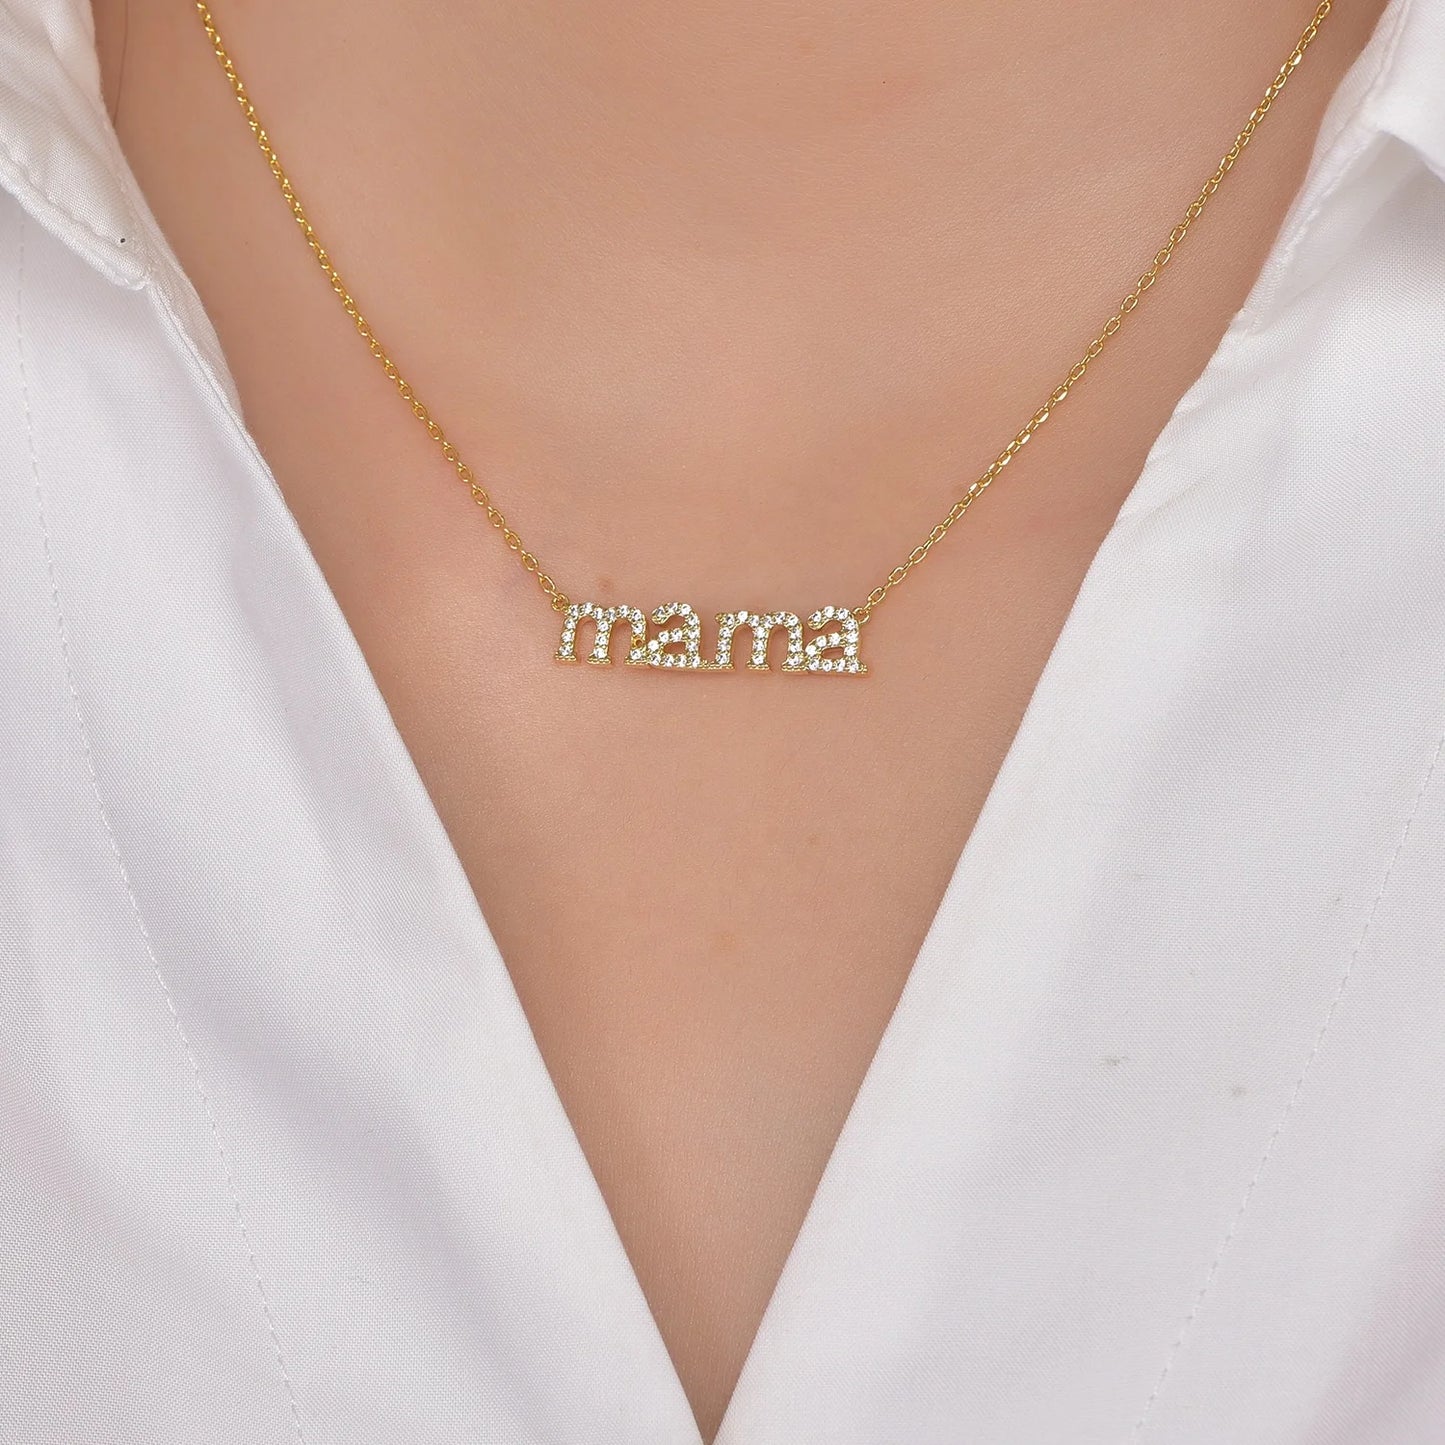 UK mama Necklace 18k Gold Silver 16" 18" Delicate Italian Snake Chain Necklace mama Necklace' Pendant